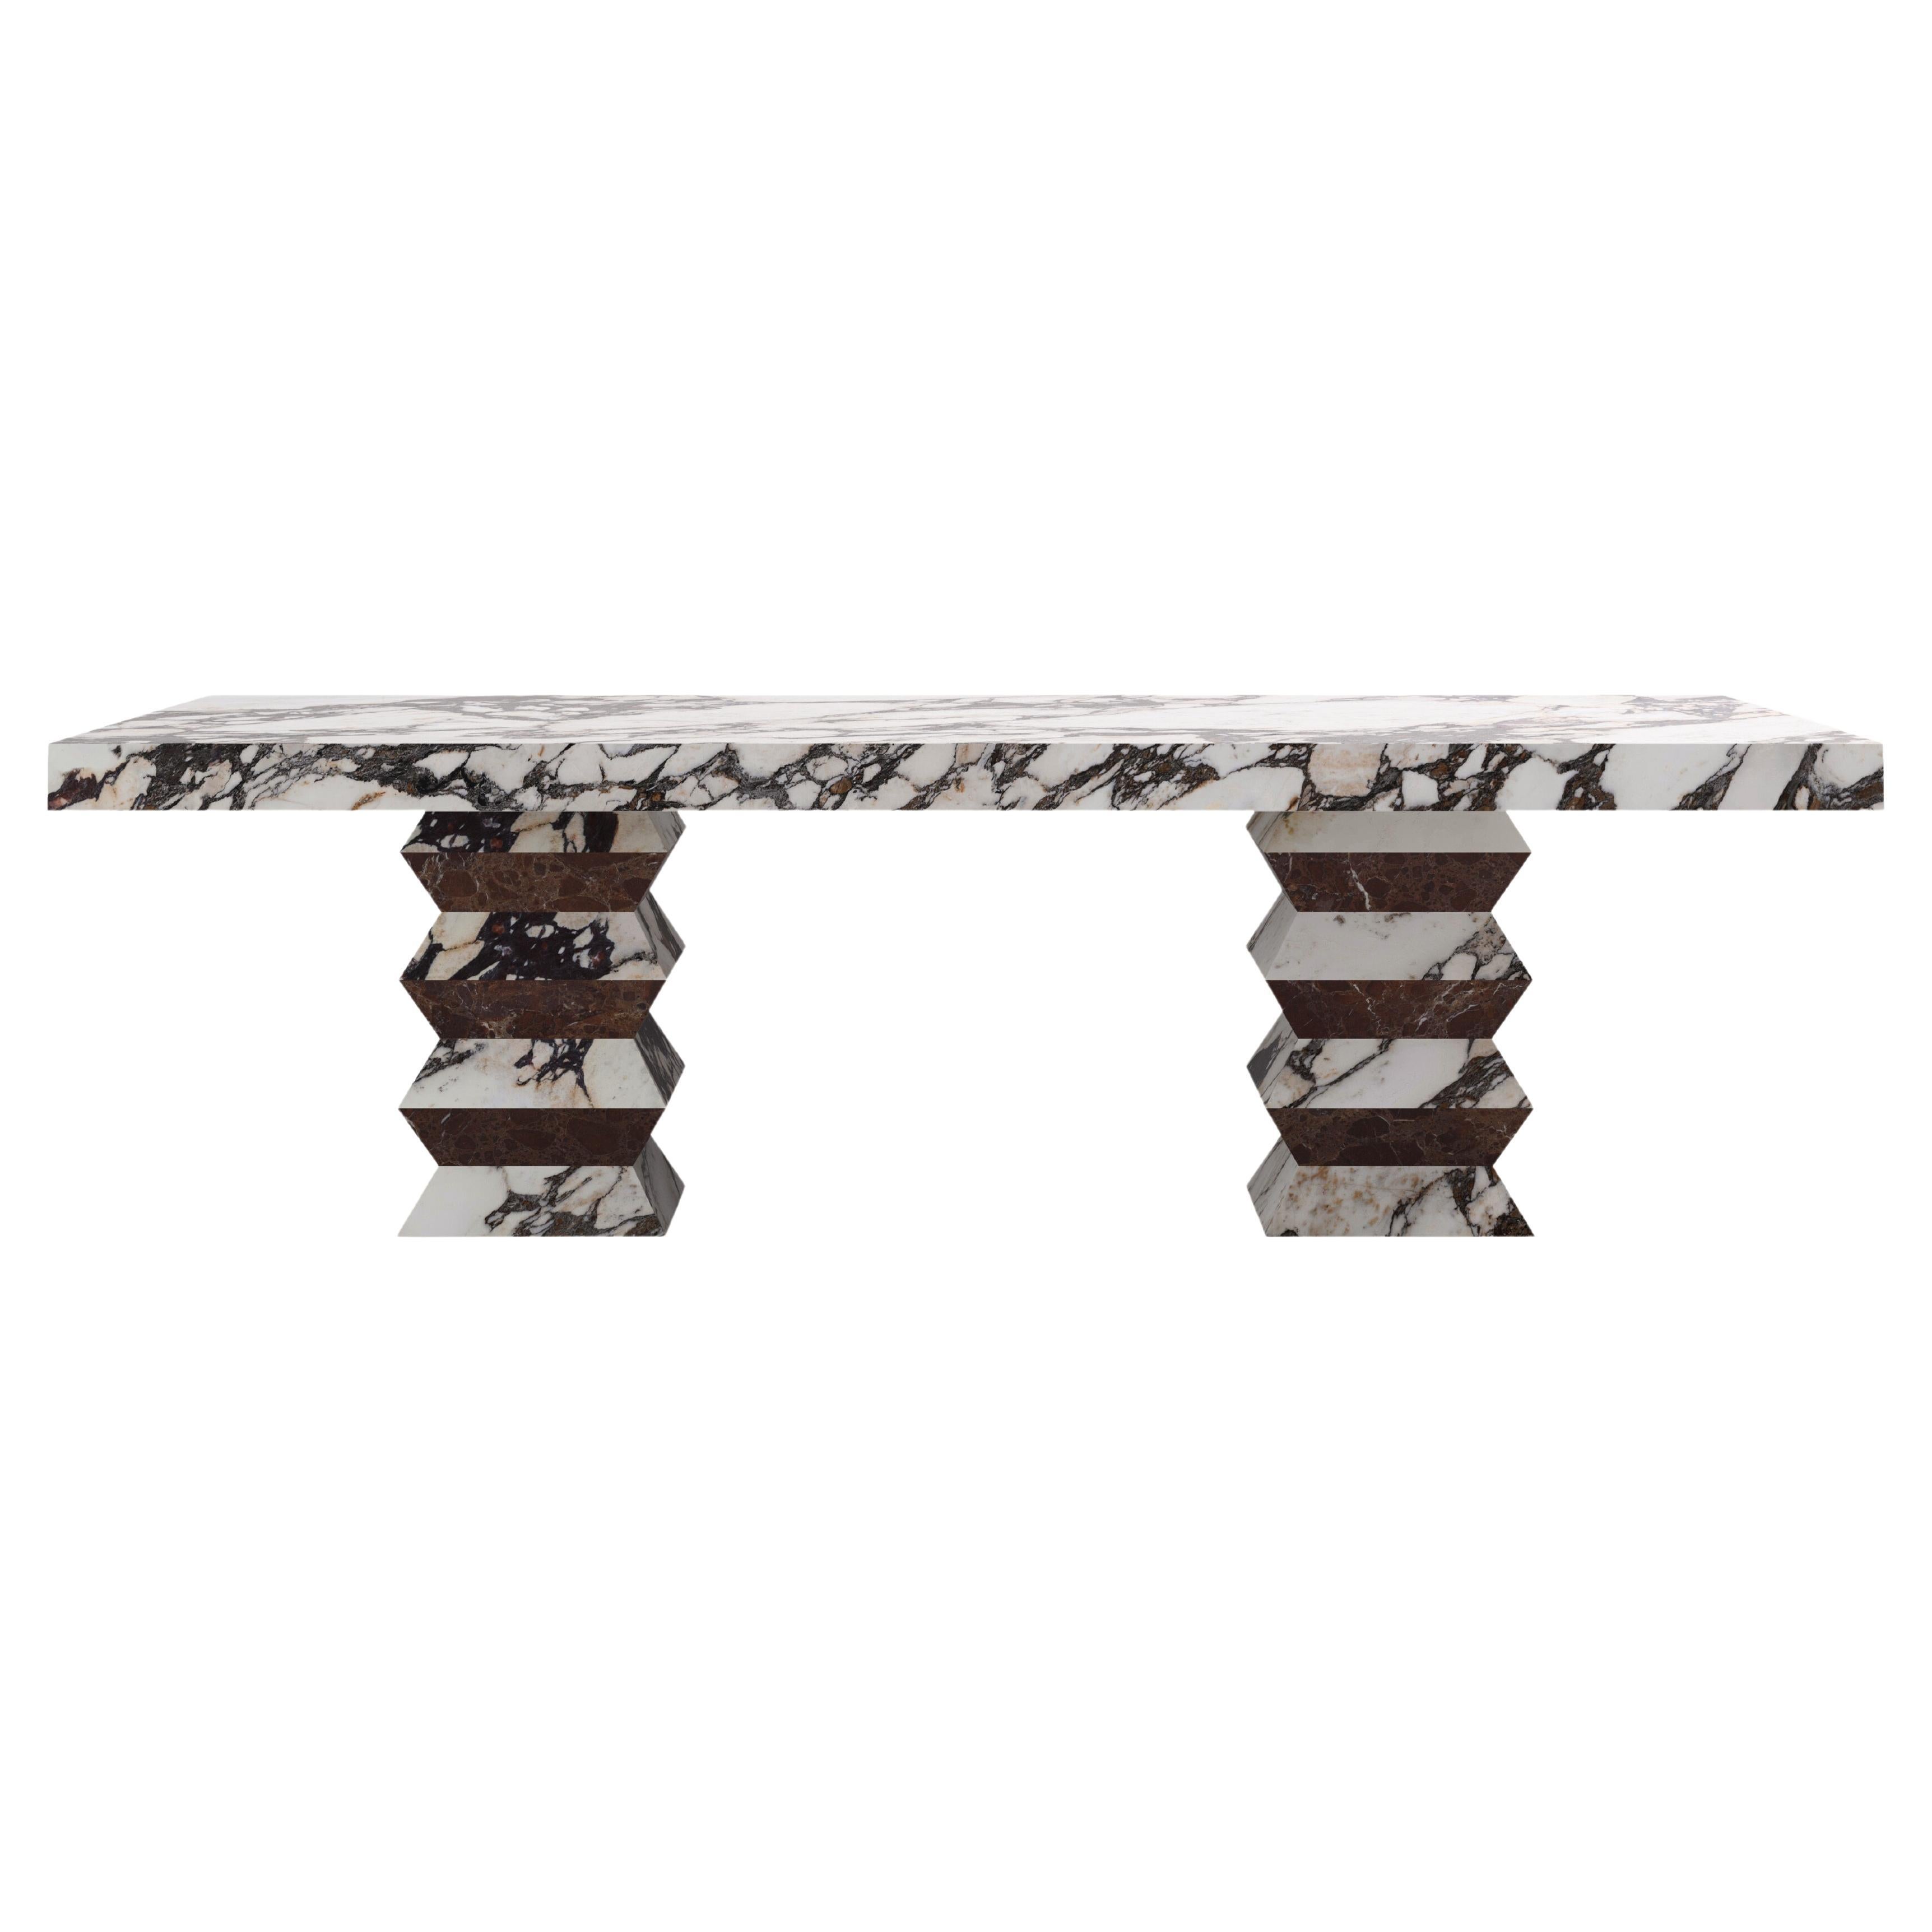 FORM(LA) Grinza Rectangle Dining Table 118"L x 48"W x 32" Calacatta Viola Marble For Sale